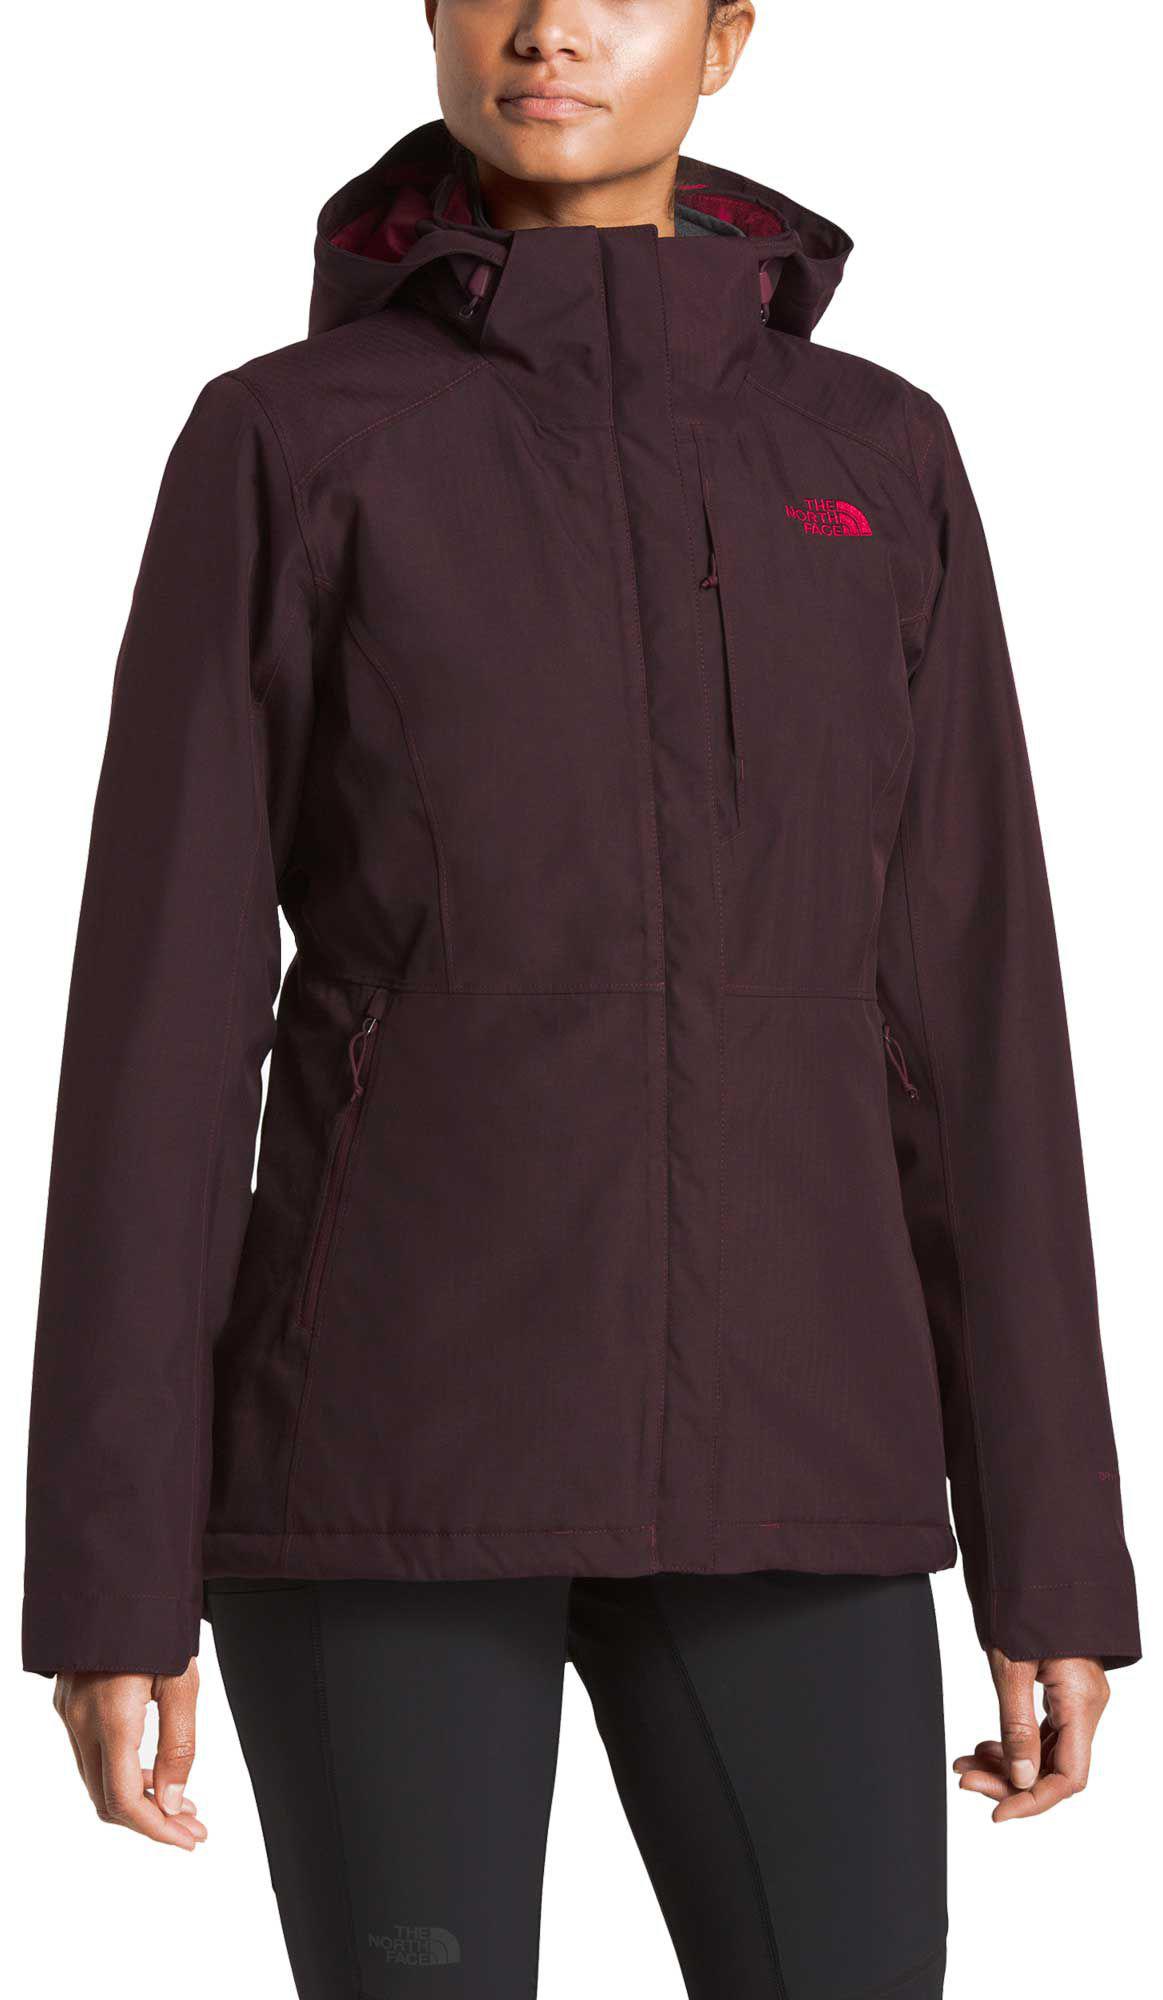 inlux 20 insulated jacket 